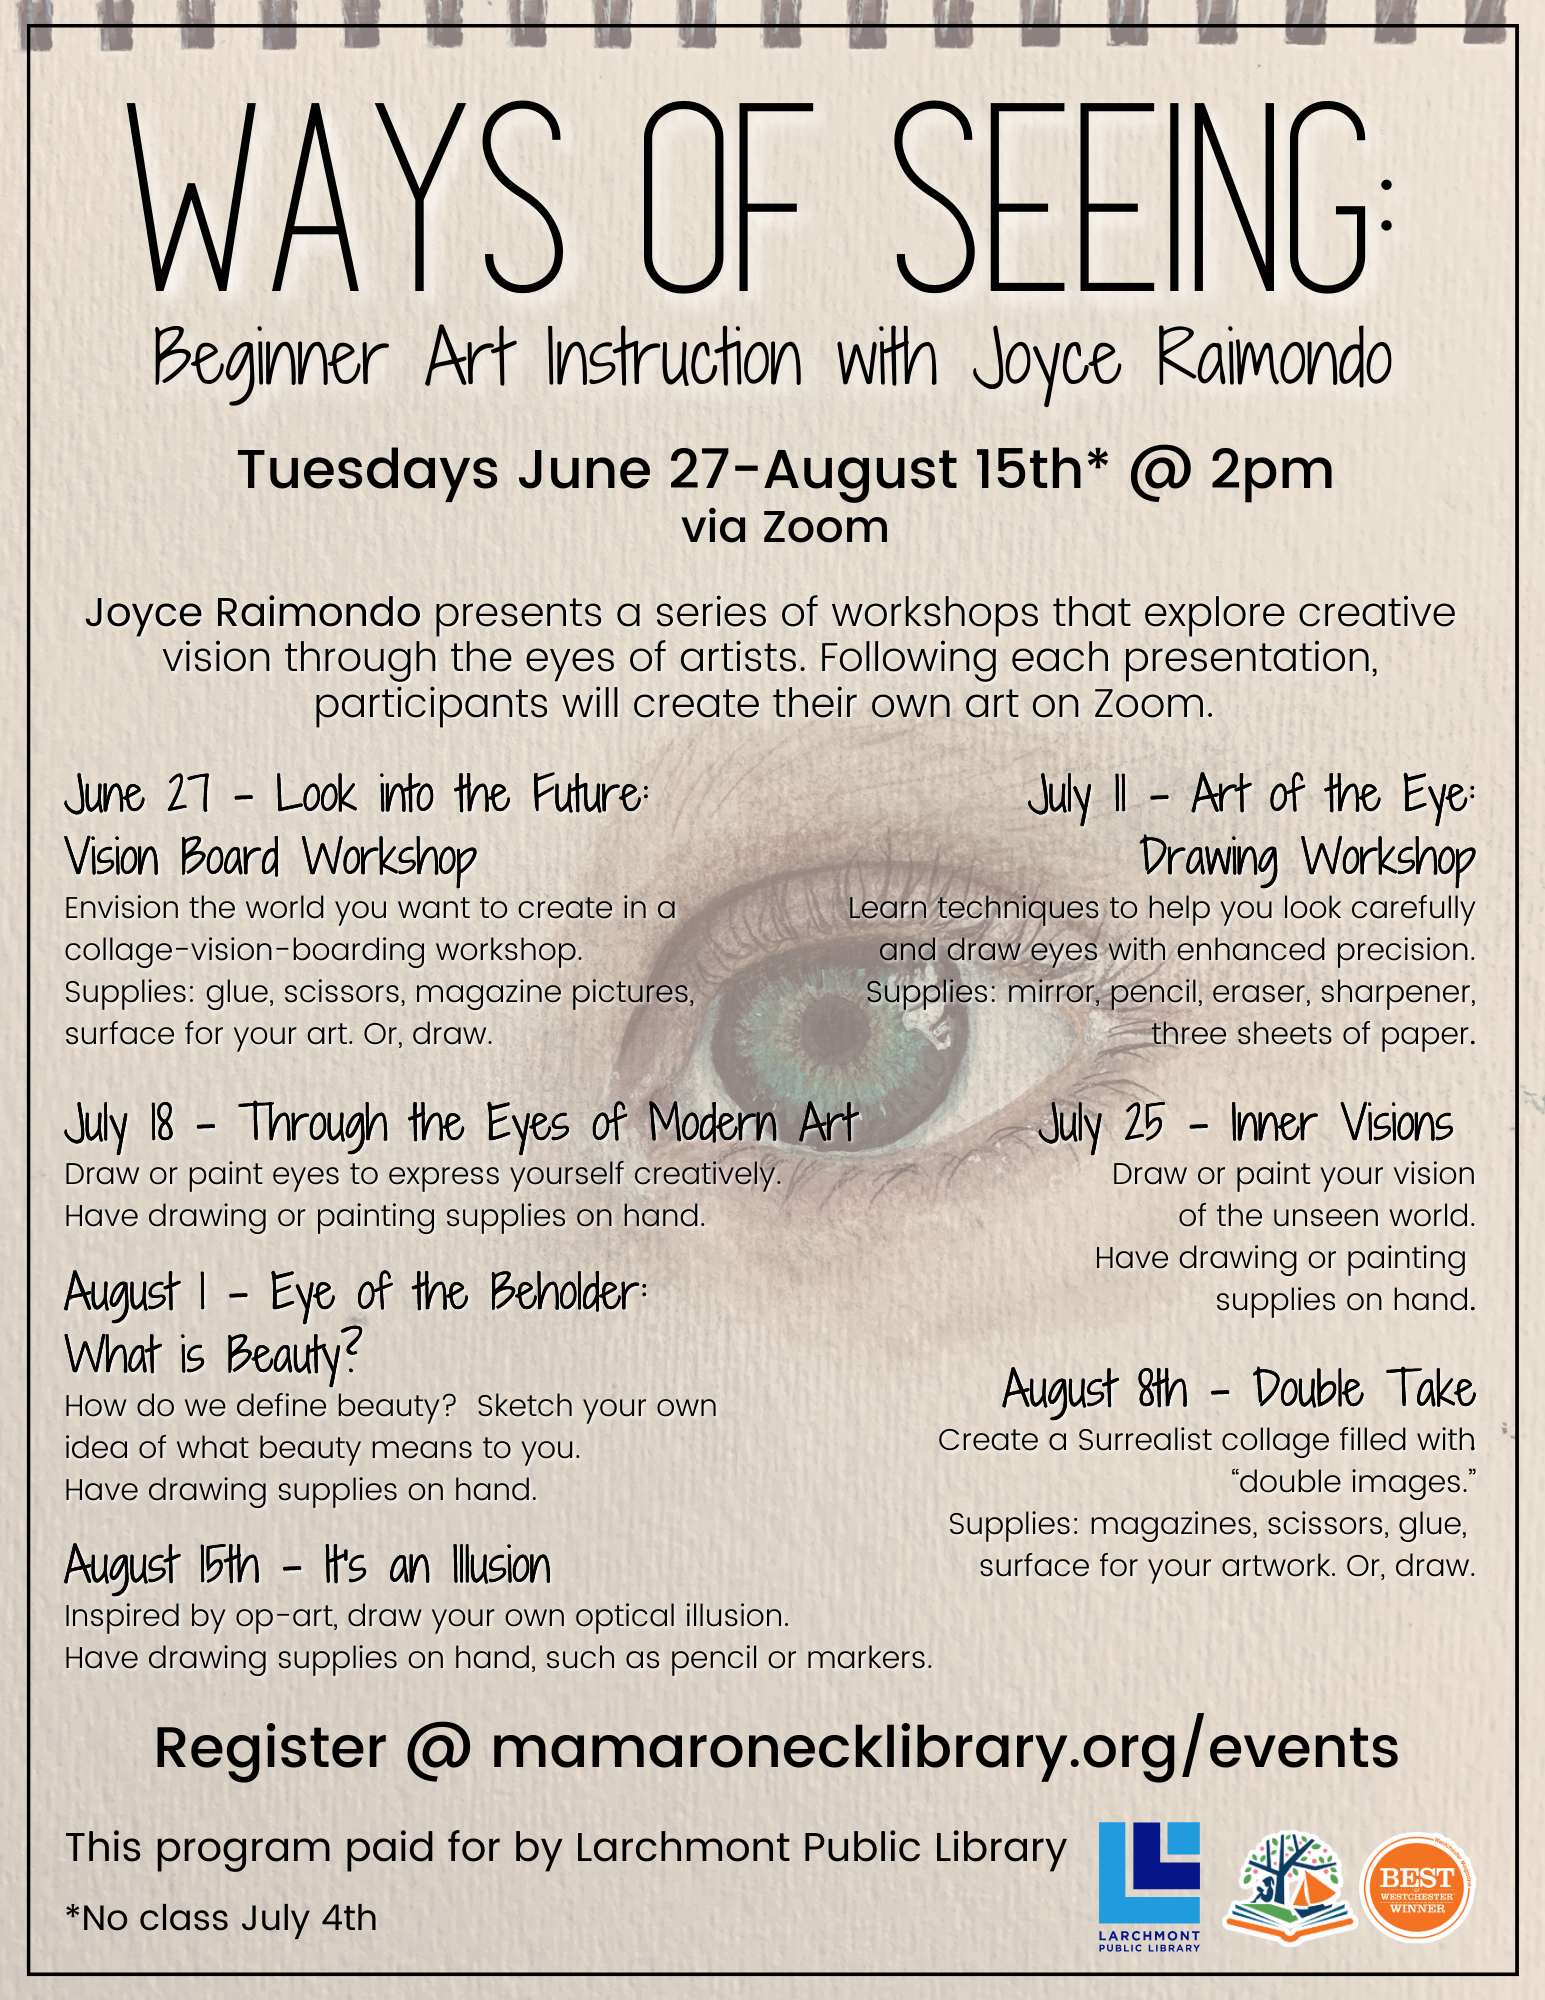 via Zoom: Ways of Seeing - beginner's art instruction - Tuesdays @ 2pm from June 27 - Aug. 15 - no class on July 4th